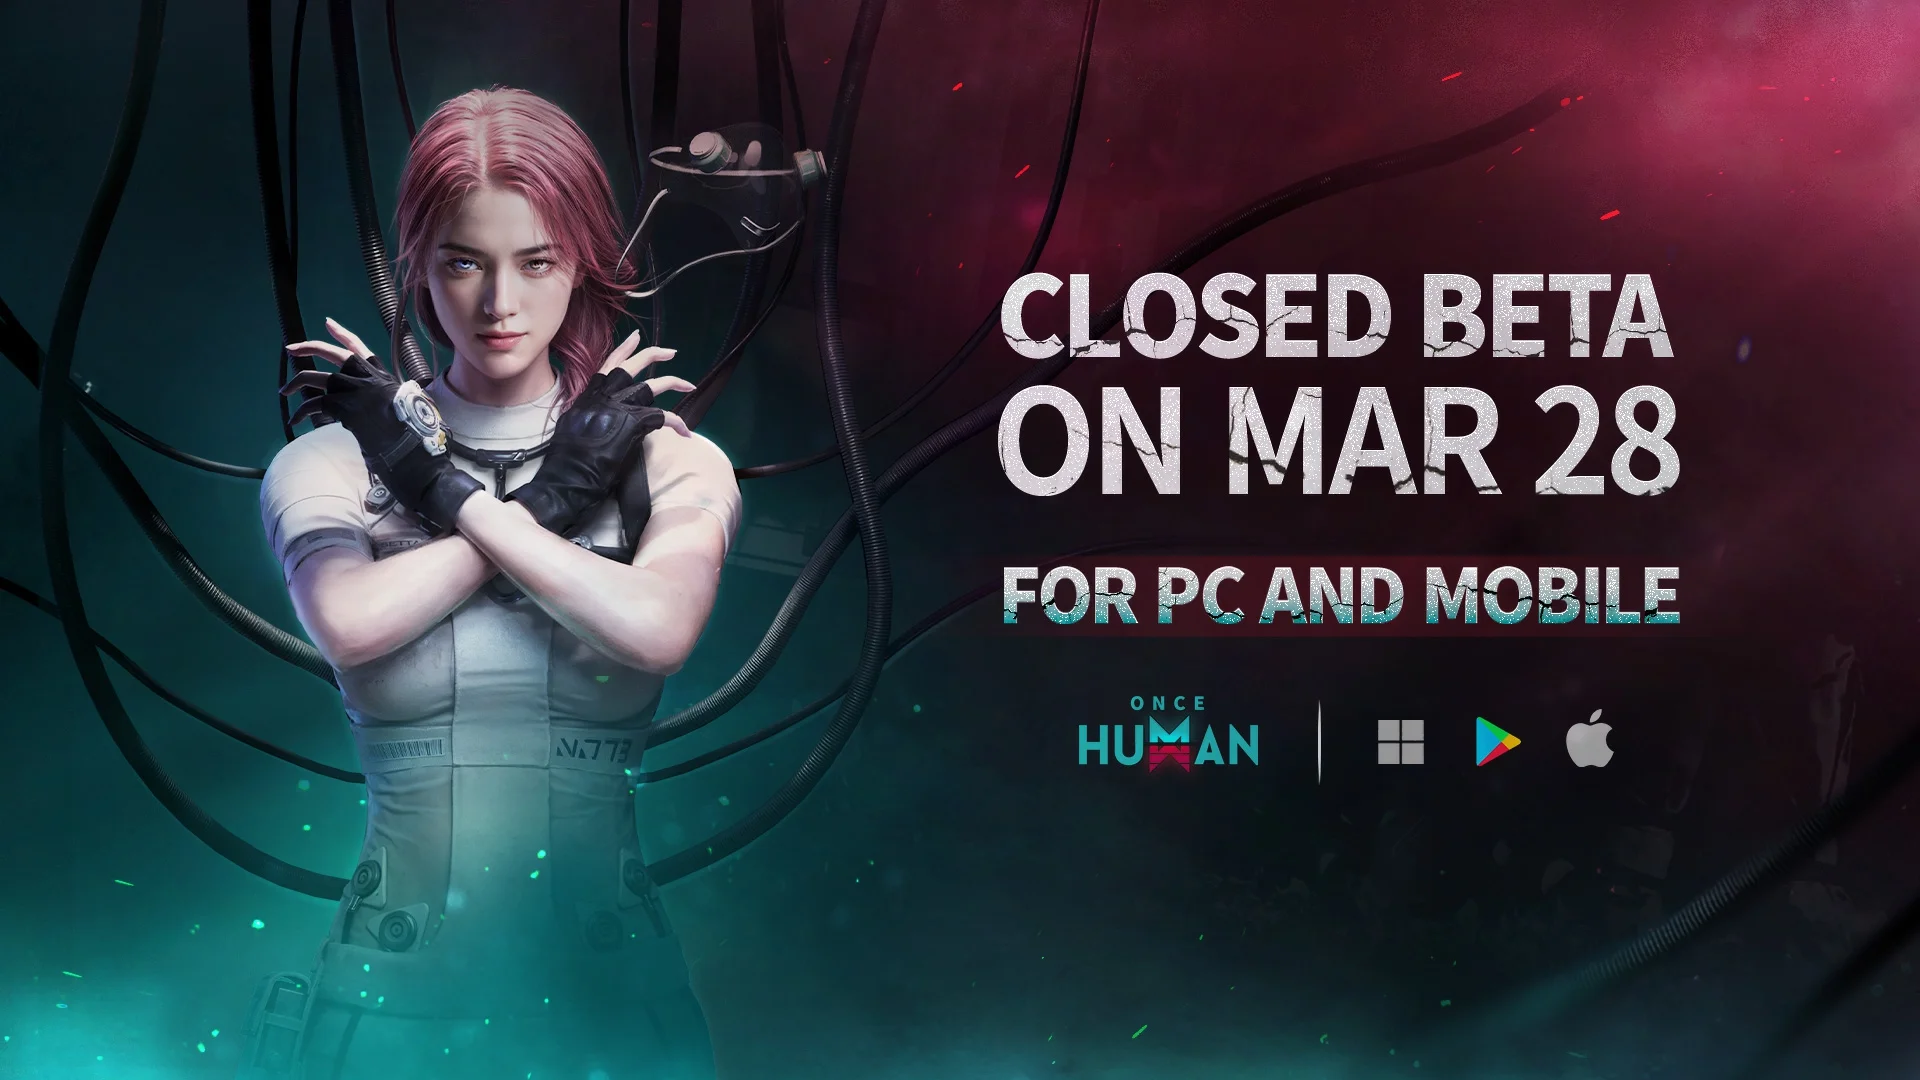 Once Human Closed Beta Test to Start, including Mobile Version